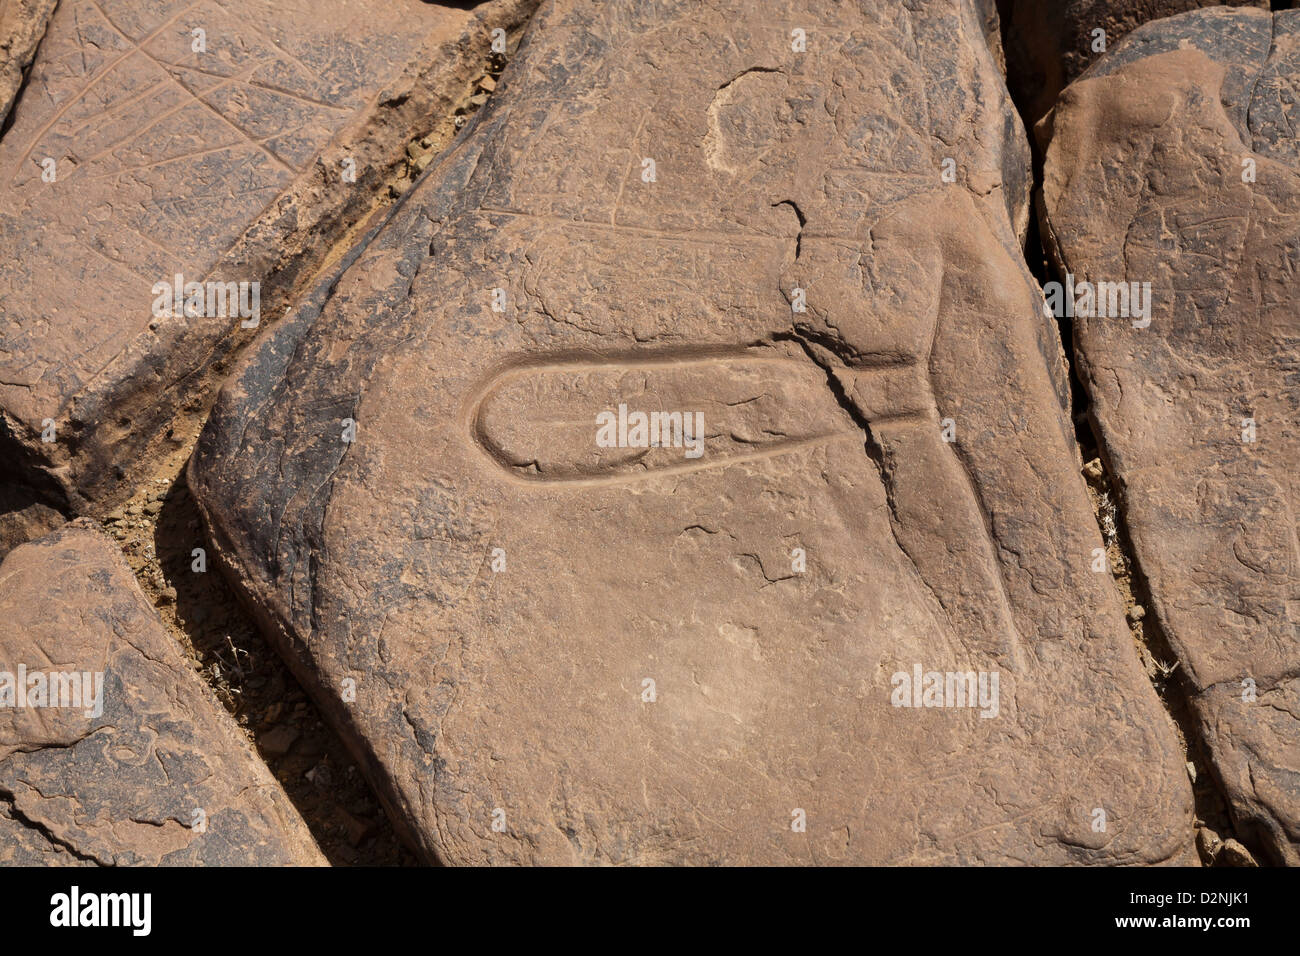 Prehistoric rock art site Ait Ouazik, Morocco, North Africa Stock Photo